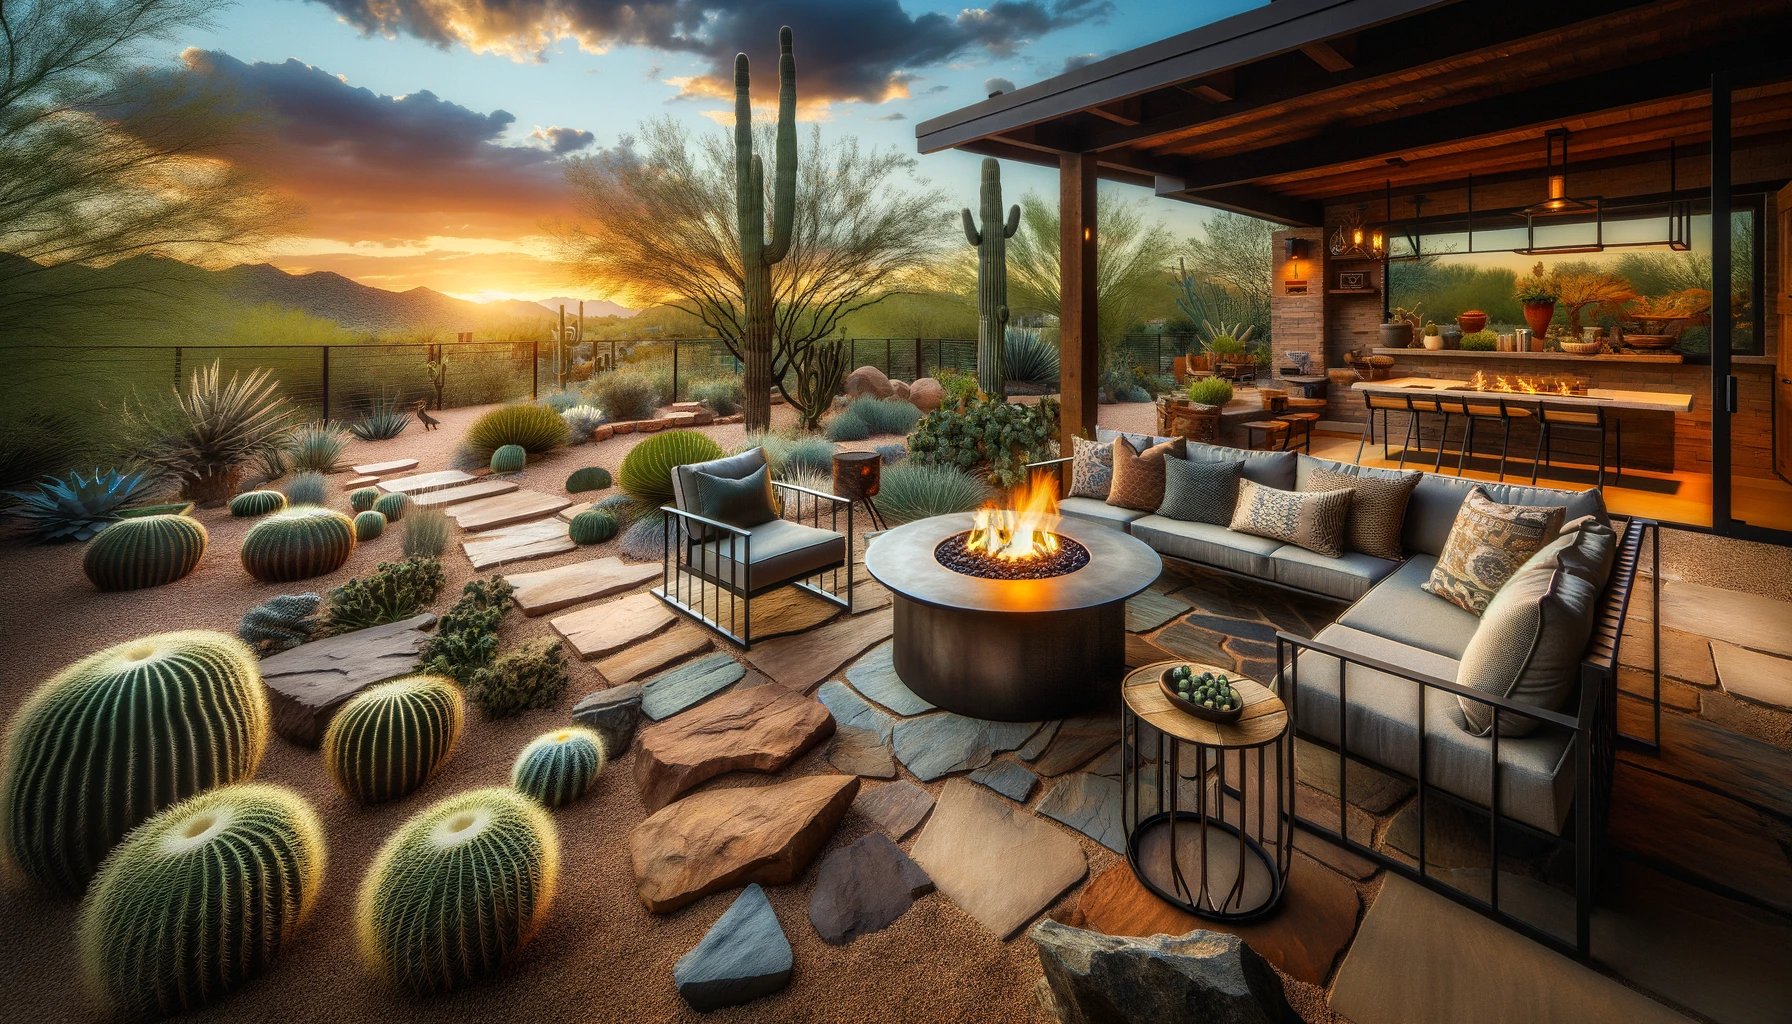 Fire Pit Designs for Cozy Arizona Evenings